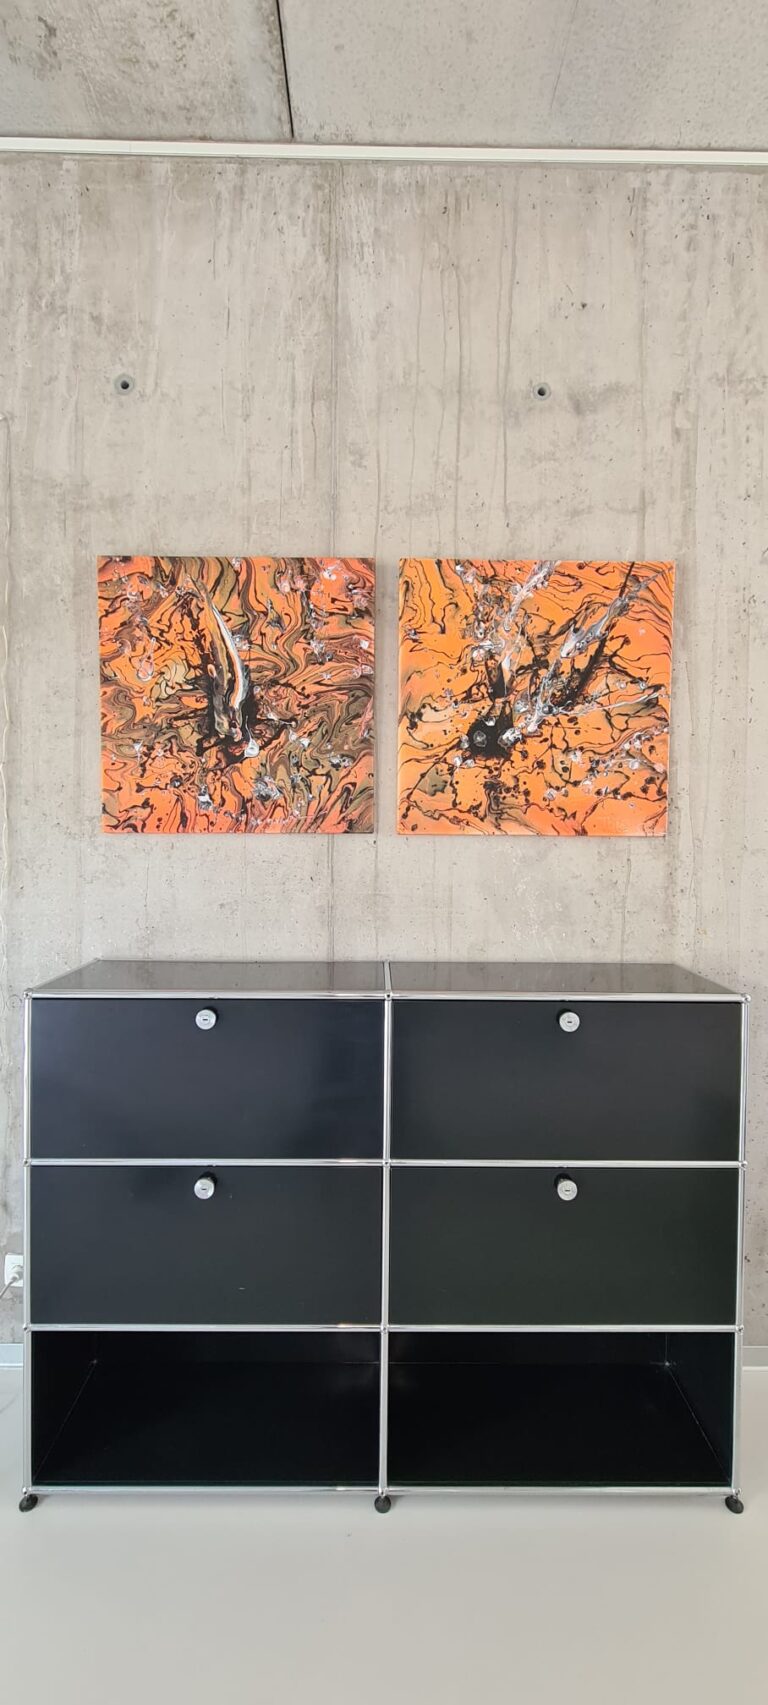 On Fire I & II - Resin with acrylics on canvas - 70x70cm - 1500 euro each